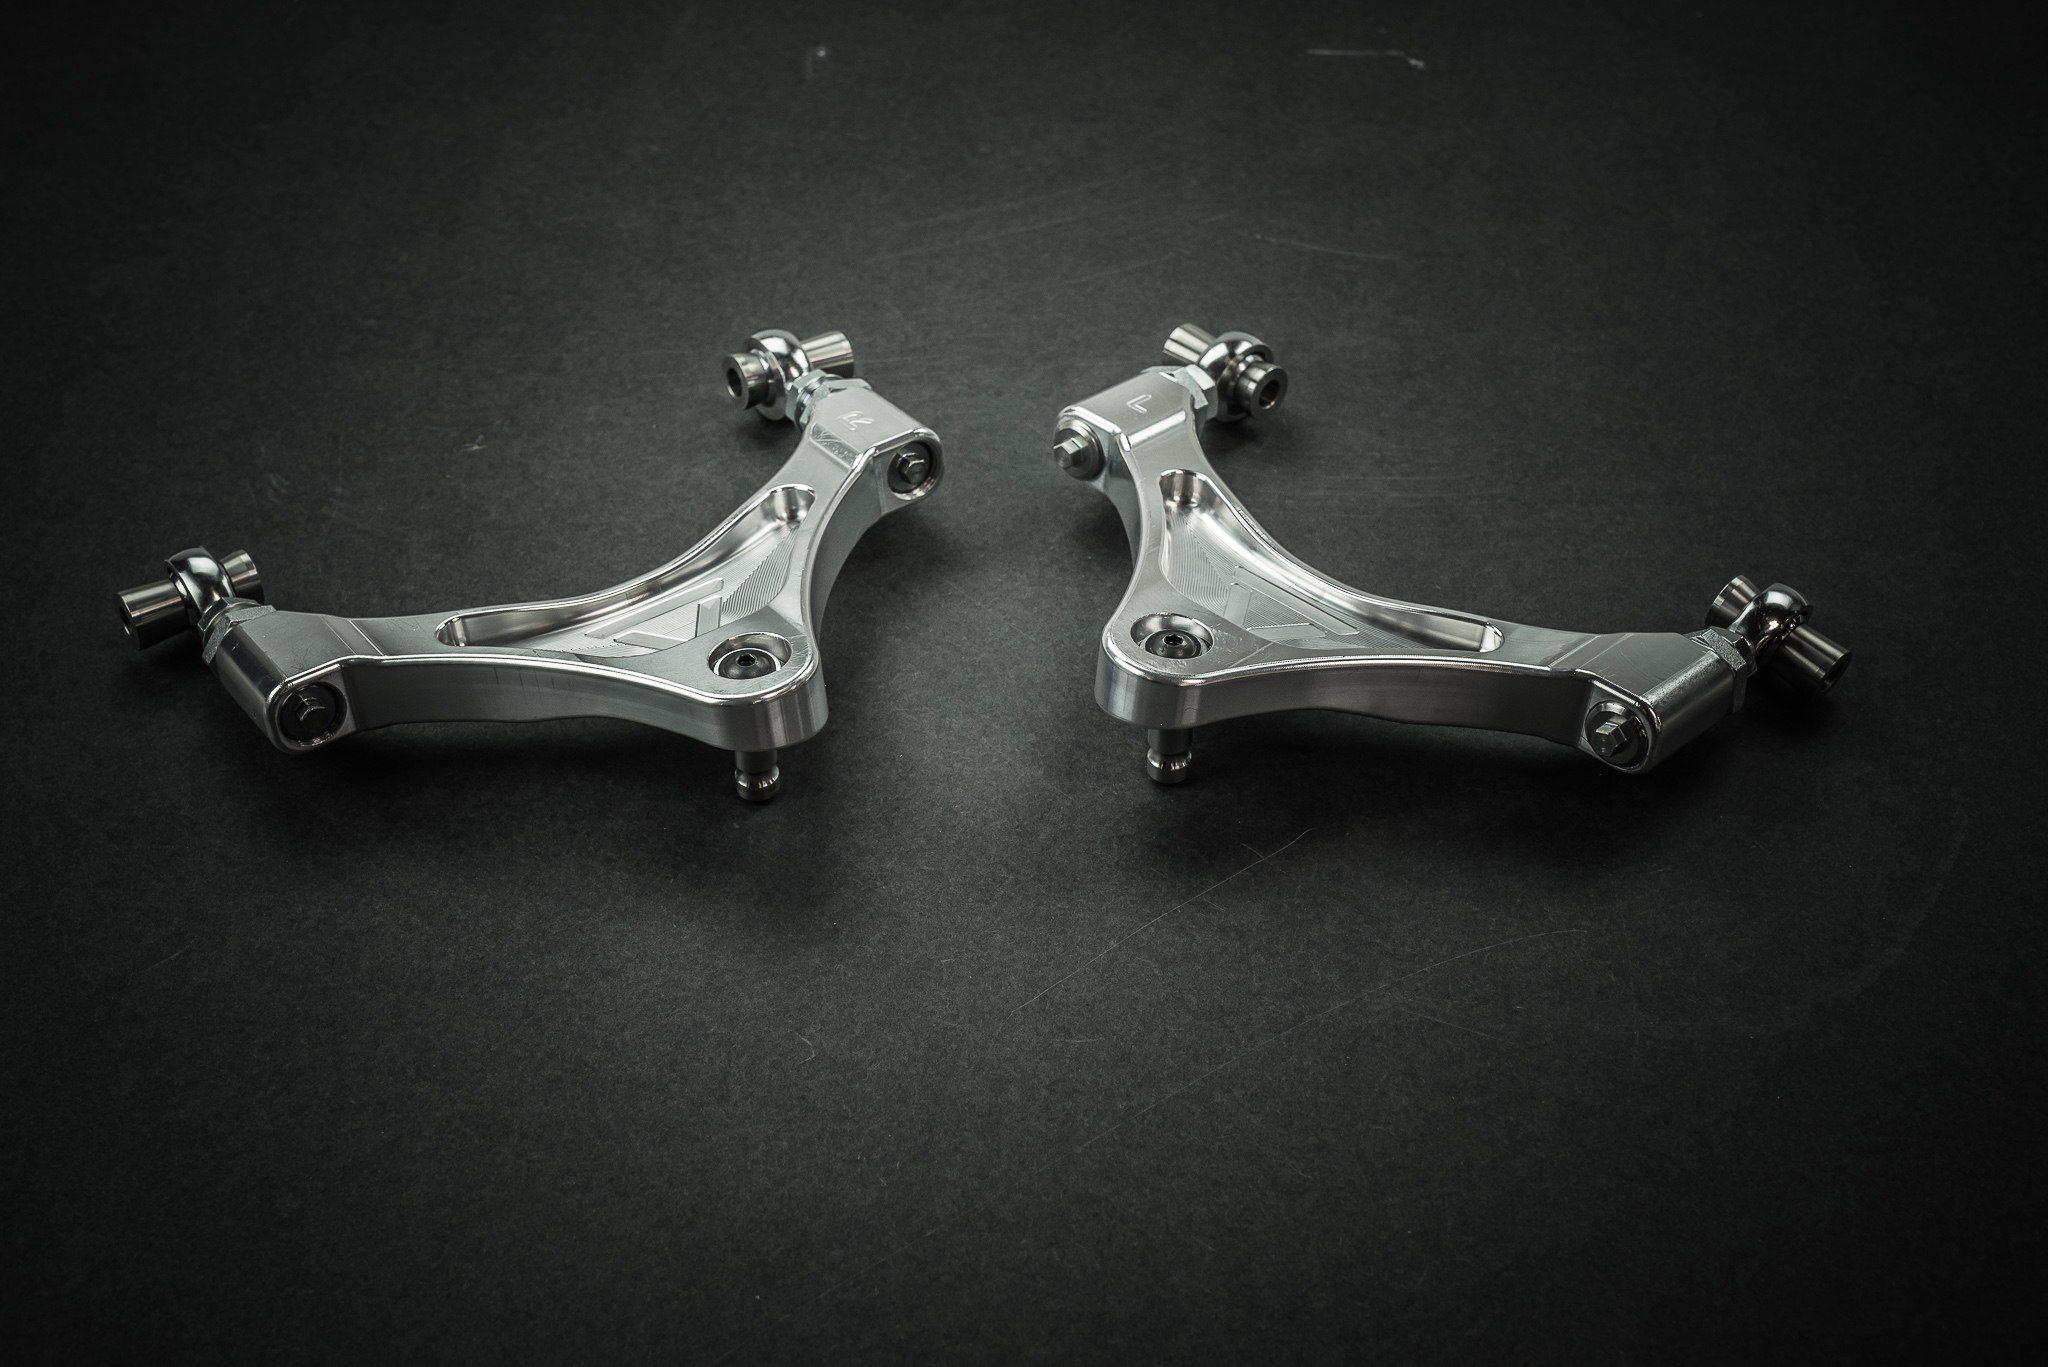 Voodoo13 Q50/G37 Front Camber/Caster Arms - Voodoo13 - Made in the USA,  suspension for street, drift and road racing